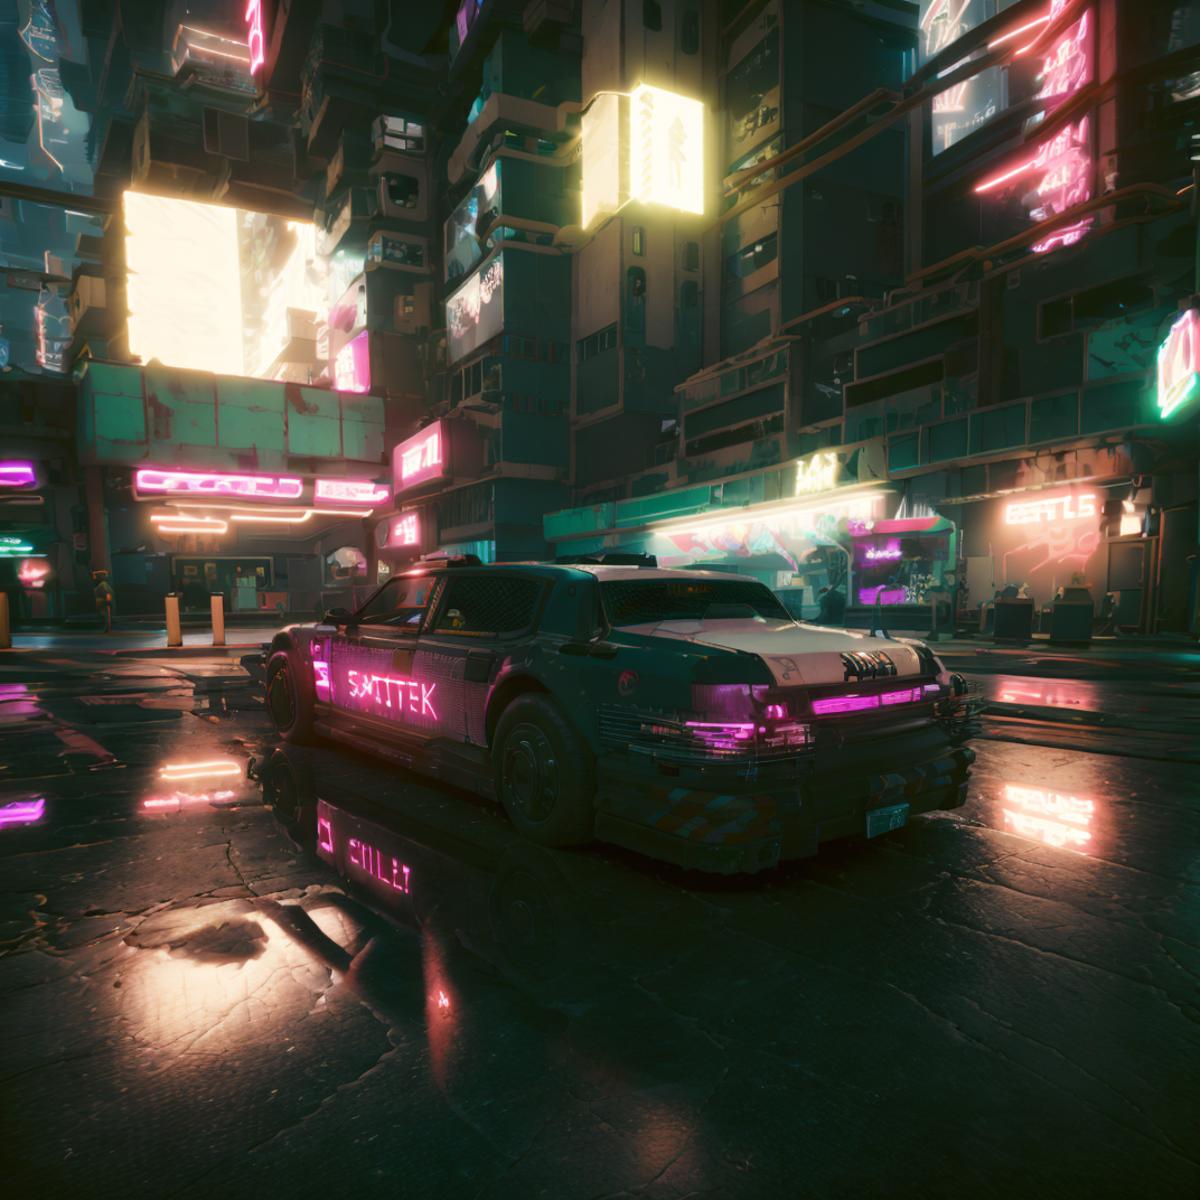 Cyberpunk 2077 Police Car (Cortes V6000 NCPD Overlord) image by DEAL